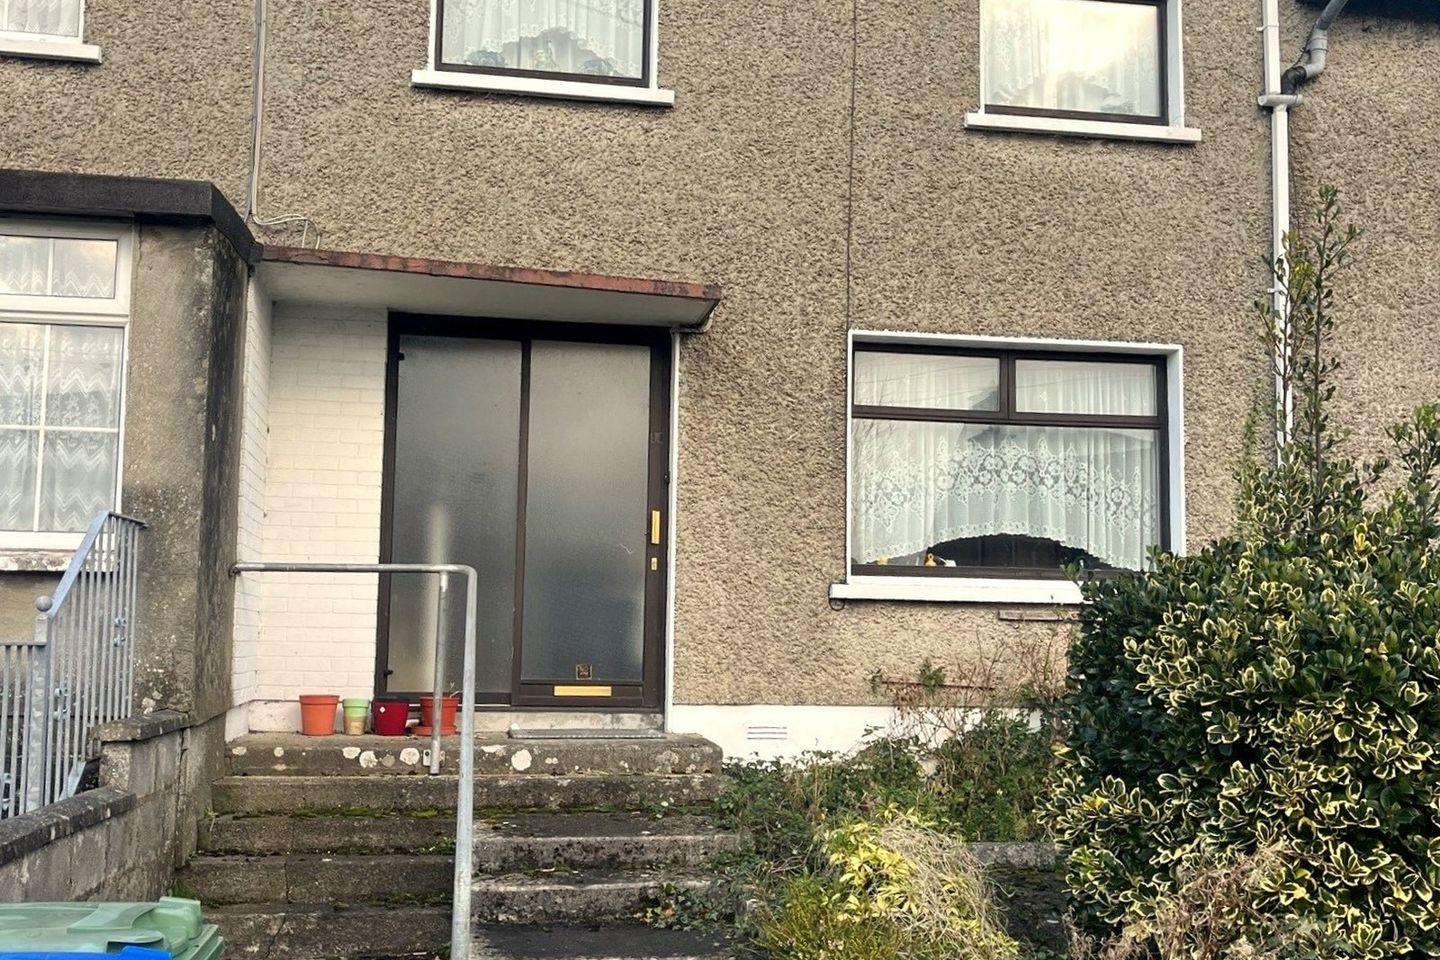 18 Kerins Park, Tralee, Co. Kerry, V92REP6